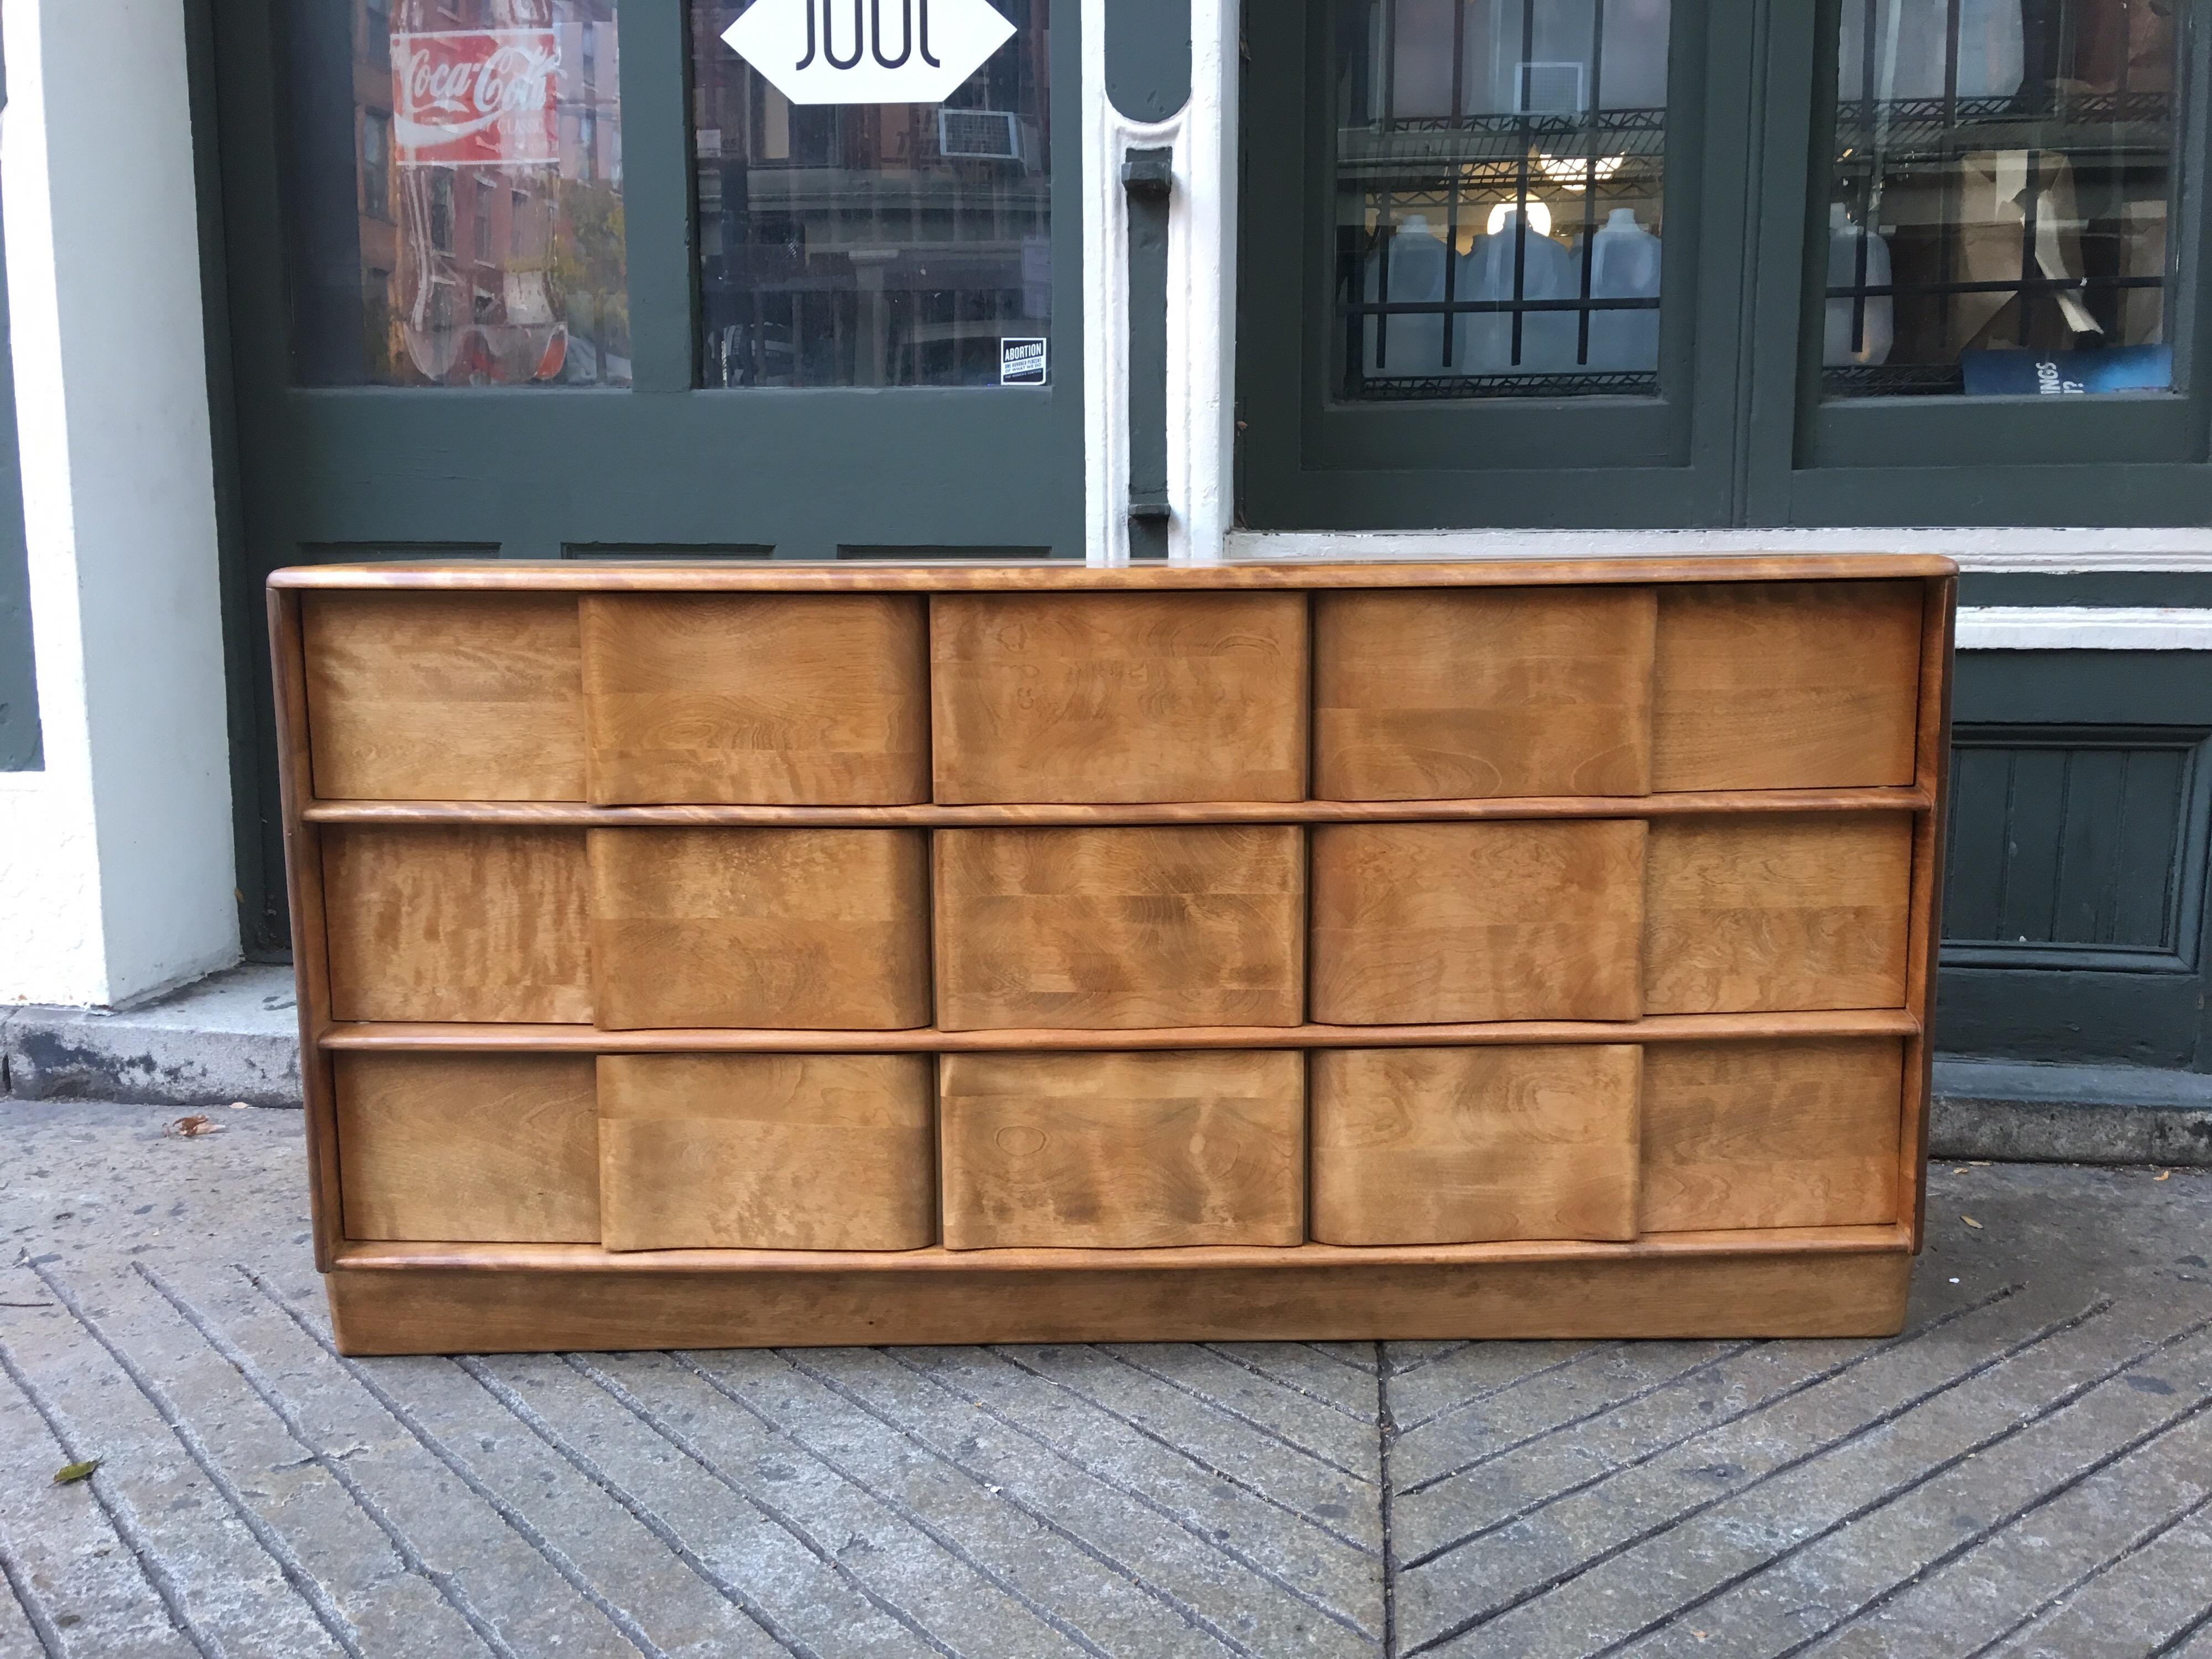 Nice 9 drawer Heywood Wakefield Sculptura dresser, two currently available. One has a slightly darker blond finish than the other one. 3 drawers at each end with 3 smaller drawers in the middle. Solid wood construction! Heywood Wakefield used solid